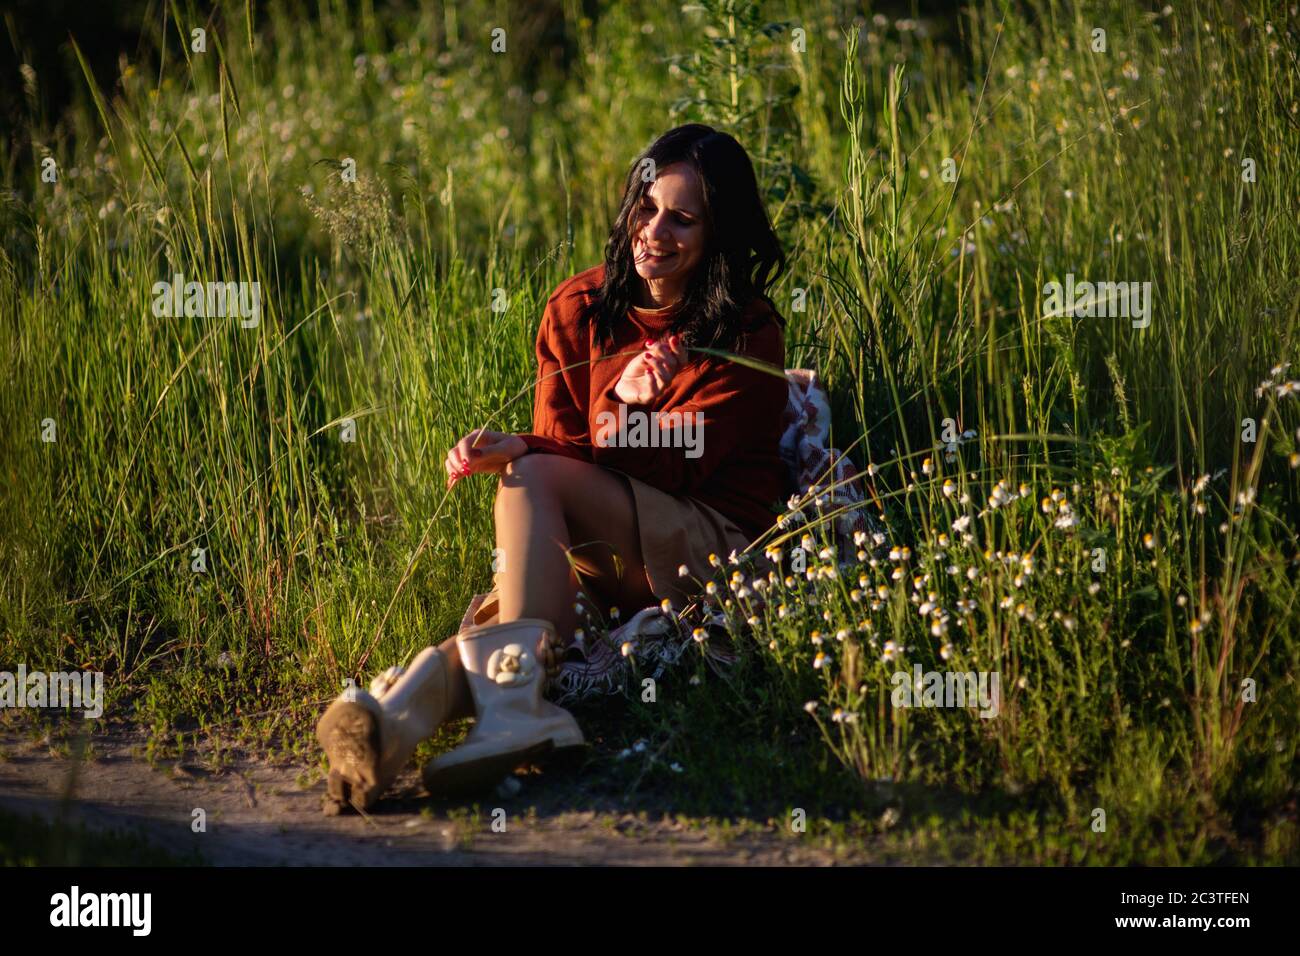 Young beautiful smiling woman sitting on grass outdoors. Stock Photo